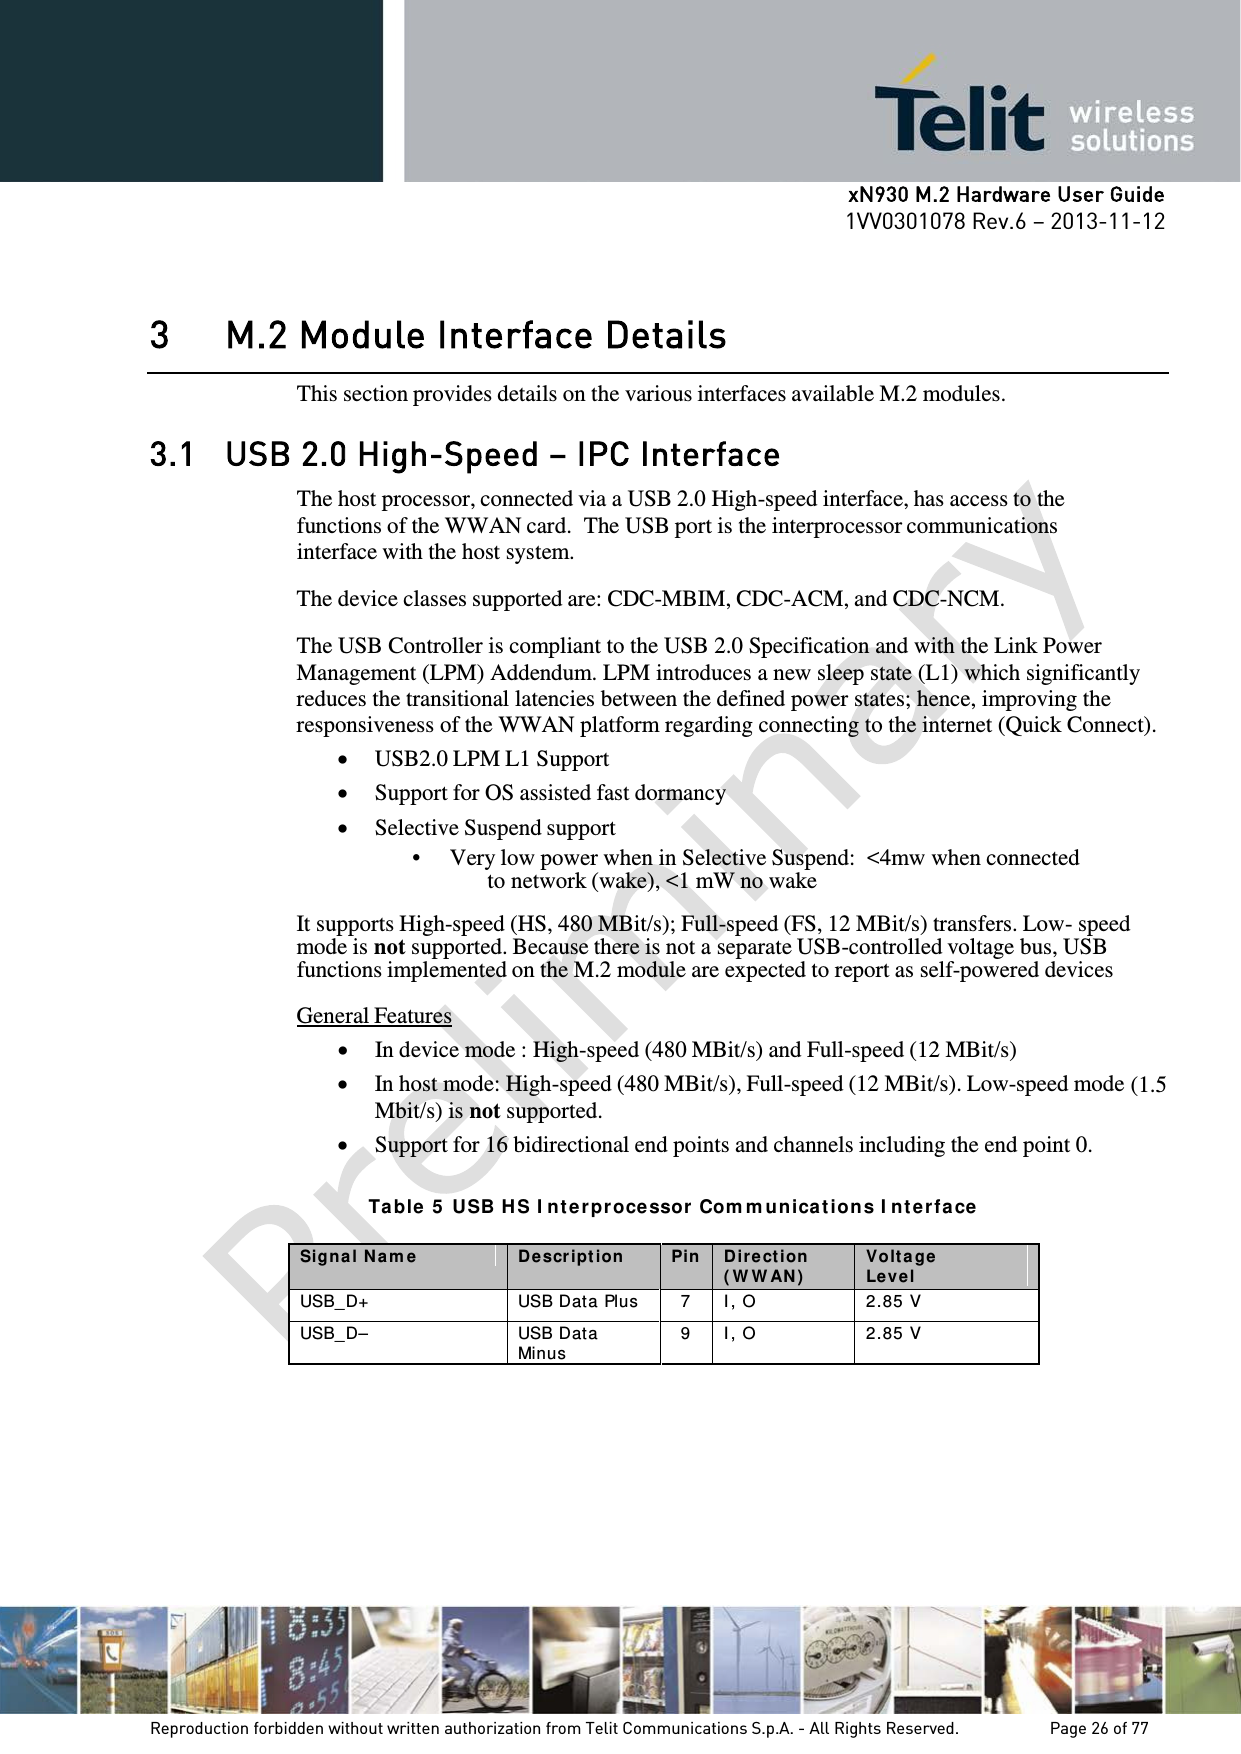      xN930 M.2 Hardware User Guide 1VV0301078 Rev.6 – 2013-11-12    3 M.2 Module Interface Details This section provides details on the various interfaces available M.2 modules. 3.1 USB 2.0 High-Speed – IPC Interface The host processor, connected via a USB 2.0 High-speed interface, has access to the functions of the WWAN card.  The USB port is the interprocessor communications interface with the host system.  The device classes supported are: CDC-MBIM, CDC-ACM, and CDC-NCM.  The USB Controller is compliant to the USB 2.0 Specification and with the Link Power Management (LPM) Addendum. LPM introduces a new sleep state (L1) which significantly reduces the transitional latencies between the defined power states; hence, improving the responsiveness of the WWAN platform regarding connecting to the internet (Quick Connect). • USB2.0 LPM L1 Support • Support for OS assisted fast dormancy • Selective Suspend support • Very low power when in Selective Suspend:  &lt;4mw when connected to network (wake), &lt;1 mW no wake  It supports High-speed (HS, 480 MBit/s); Full-speed (FS, 12 MBit/s) transfers. Low- speed mode is not supported. Because there is not a separate USB-controlled voltage bus, USB functions implemented on the M.2 module are expected to report as self-powered devices  General Features • In device mode : High-speed (480 MBit/s) and Full-speed (12 MBit/s) • In host mode: High-speed (480 MBit/s), Full-speed (12 MBit/s). Low-speed mode (1.5 Mbit/s) is not supported. • Support for 16 bidirectional end points and channels including the end point 0.  Ta ble  5  USB H S I nt e rproce ssor  Com mun ica tion s I nt e rface Signa l N a m e D escr ipt ion  Pin D ir ect ion  ( W W AN ) Volt a ge Level USB_D+  USB Data Plus 7 I , O 2.85 V USB_D– USB Dat a Minus 9 I , O 2.85 V   Reproduction forbidden without written authorization from Telit Communications S.p.A. - All Rights Reserved.    Page 26 of 77 